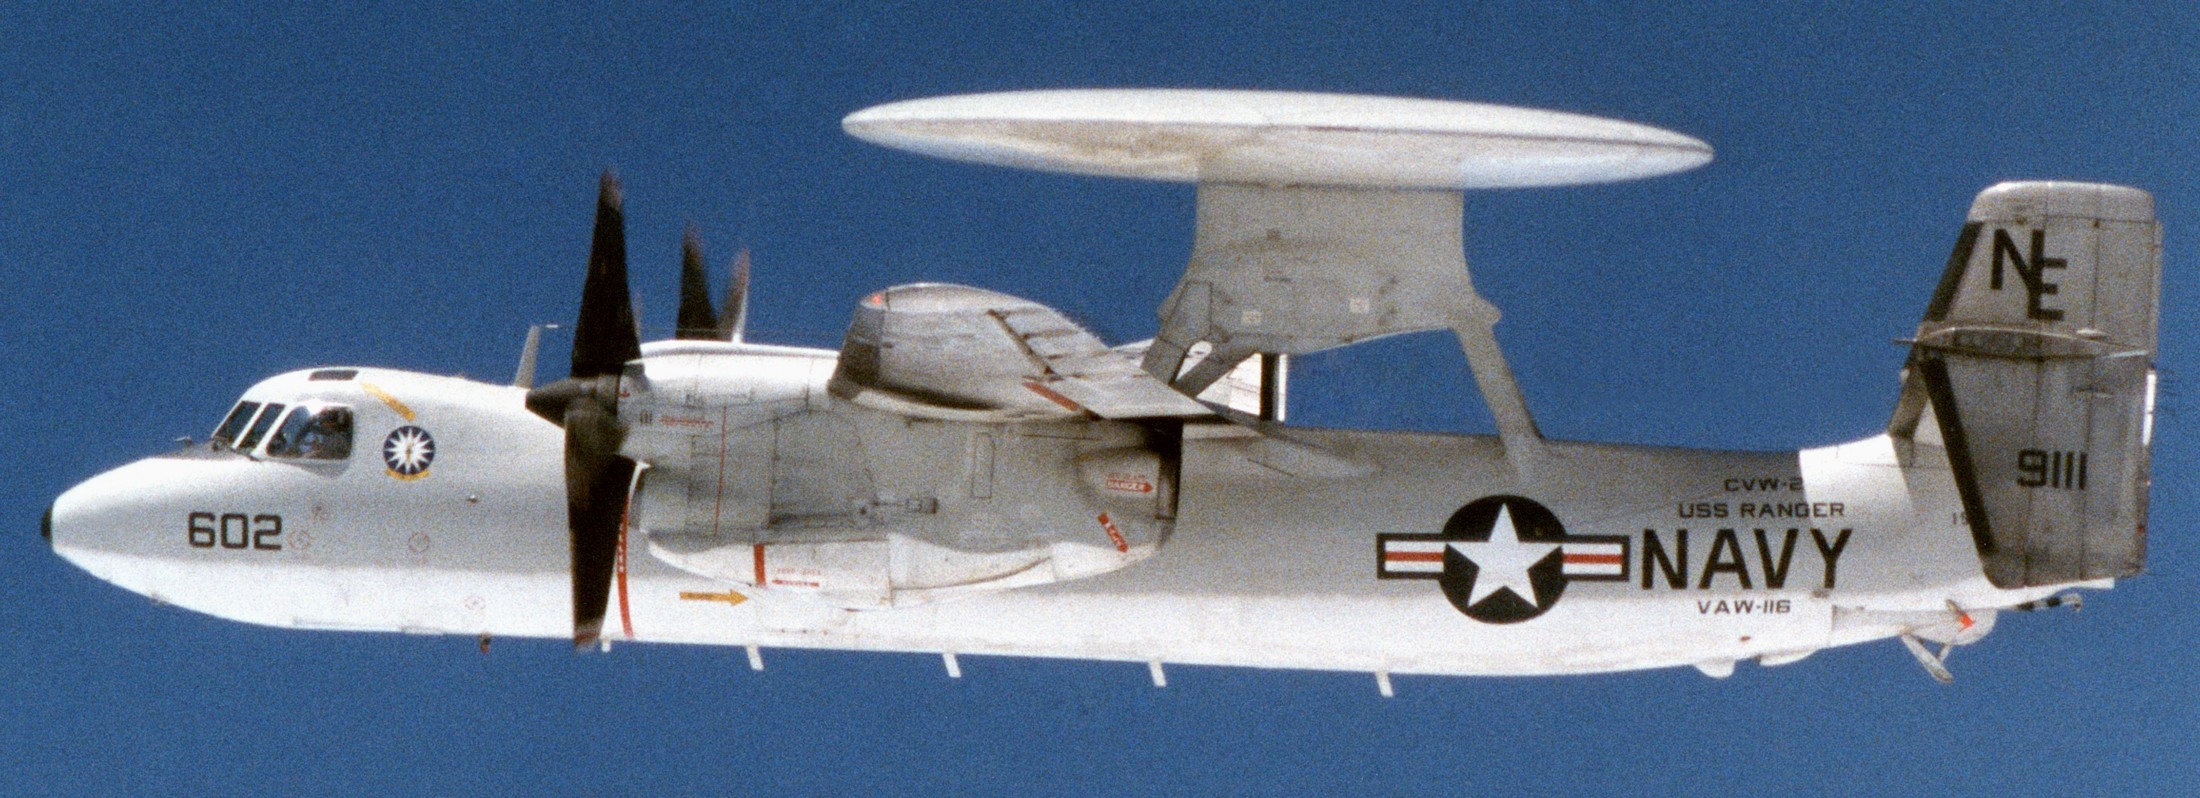 vaw-116 sun kings airborne command control squadron carrier early warning cvw-2 uss ranger cv-61 118